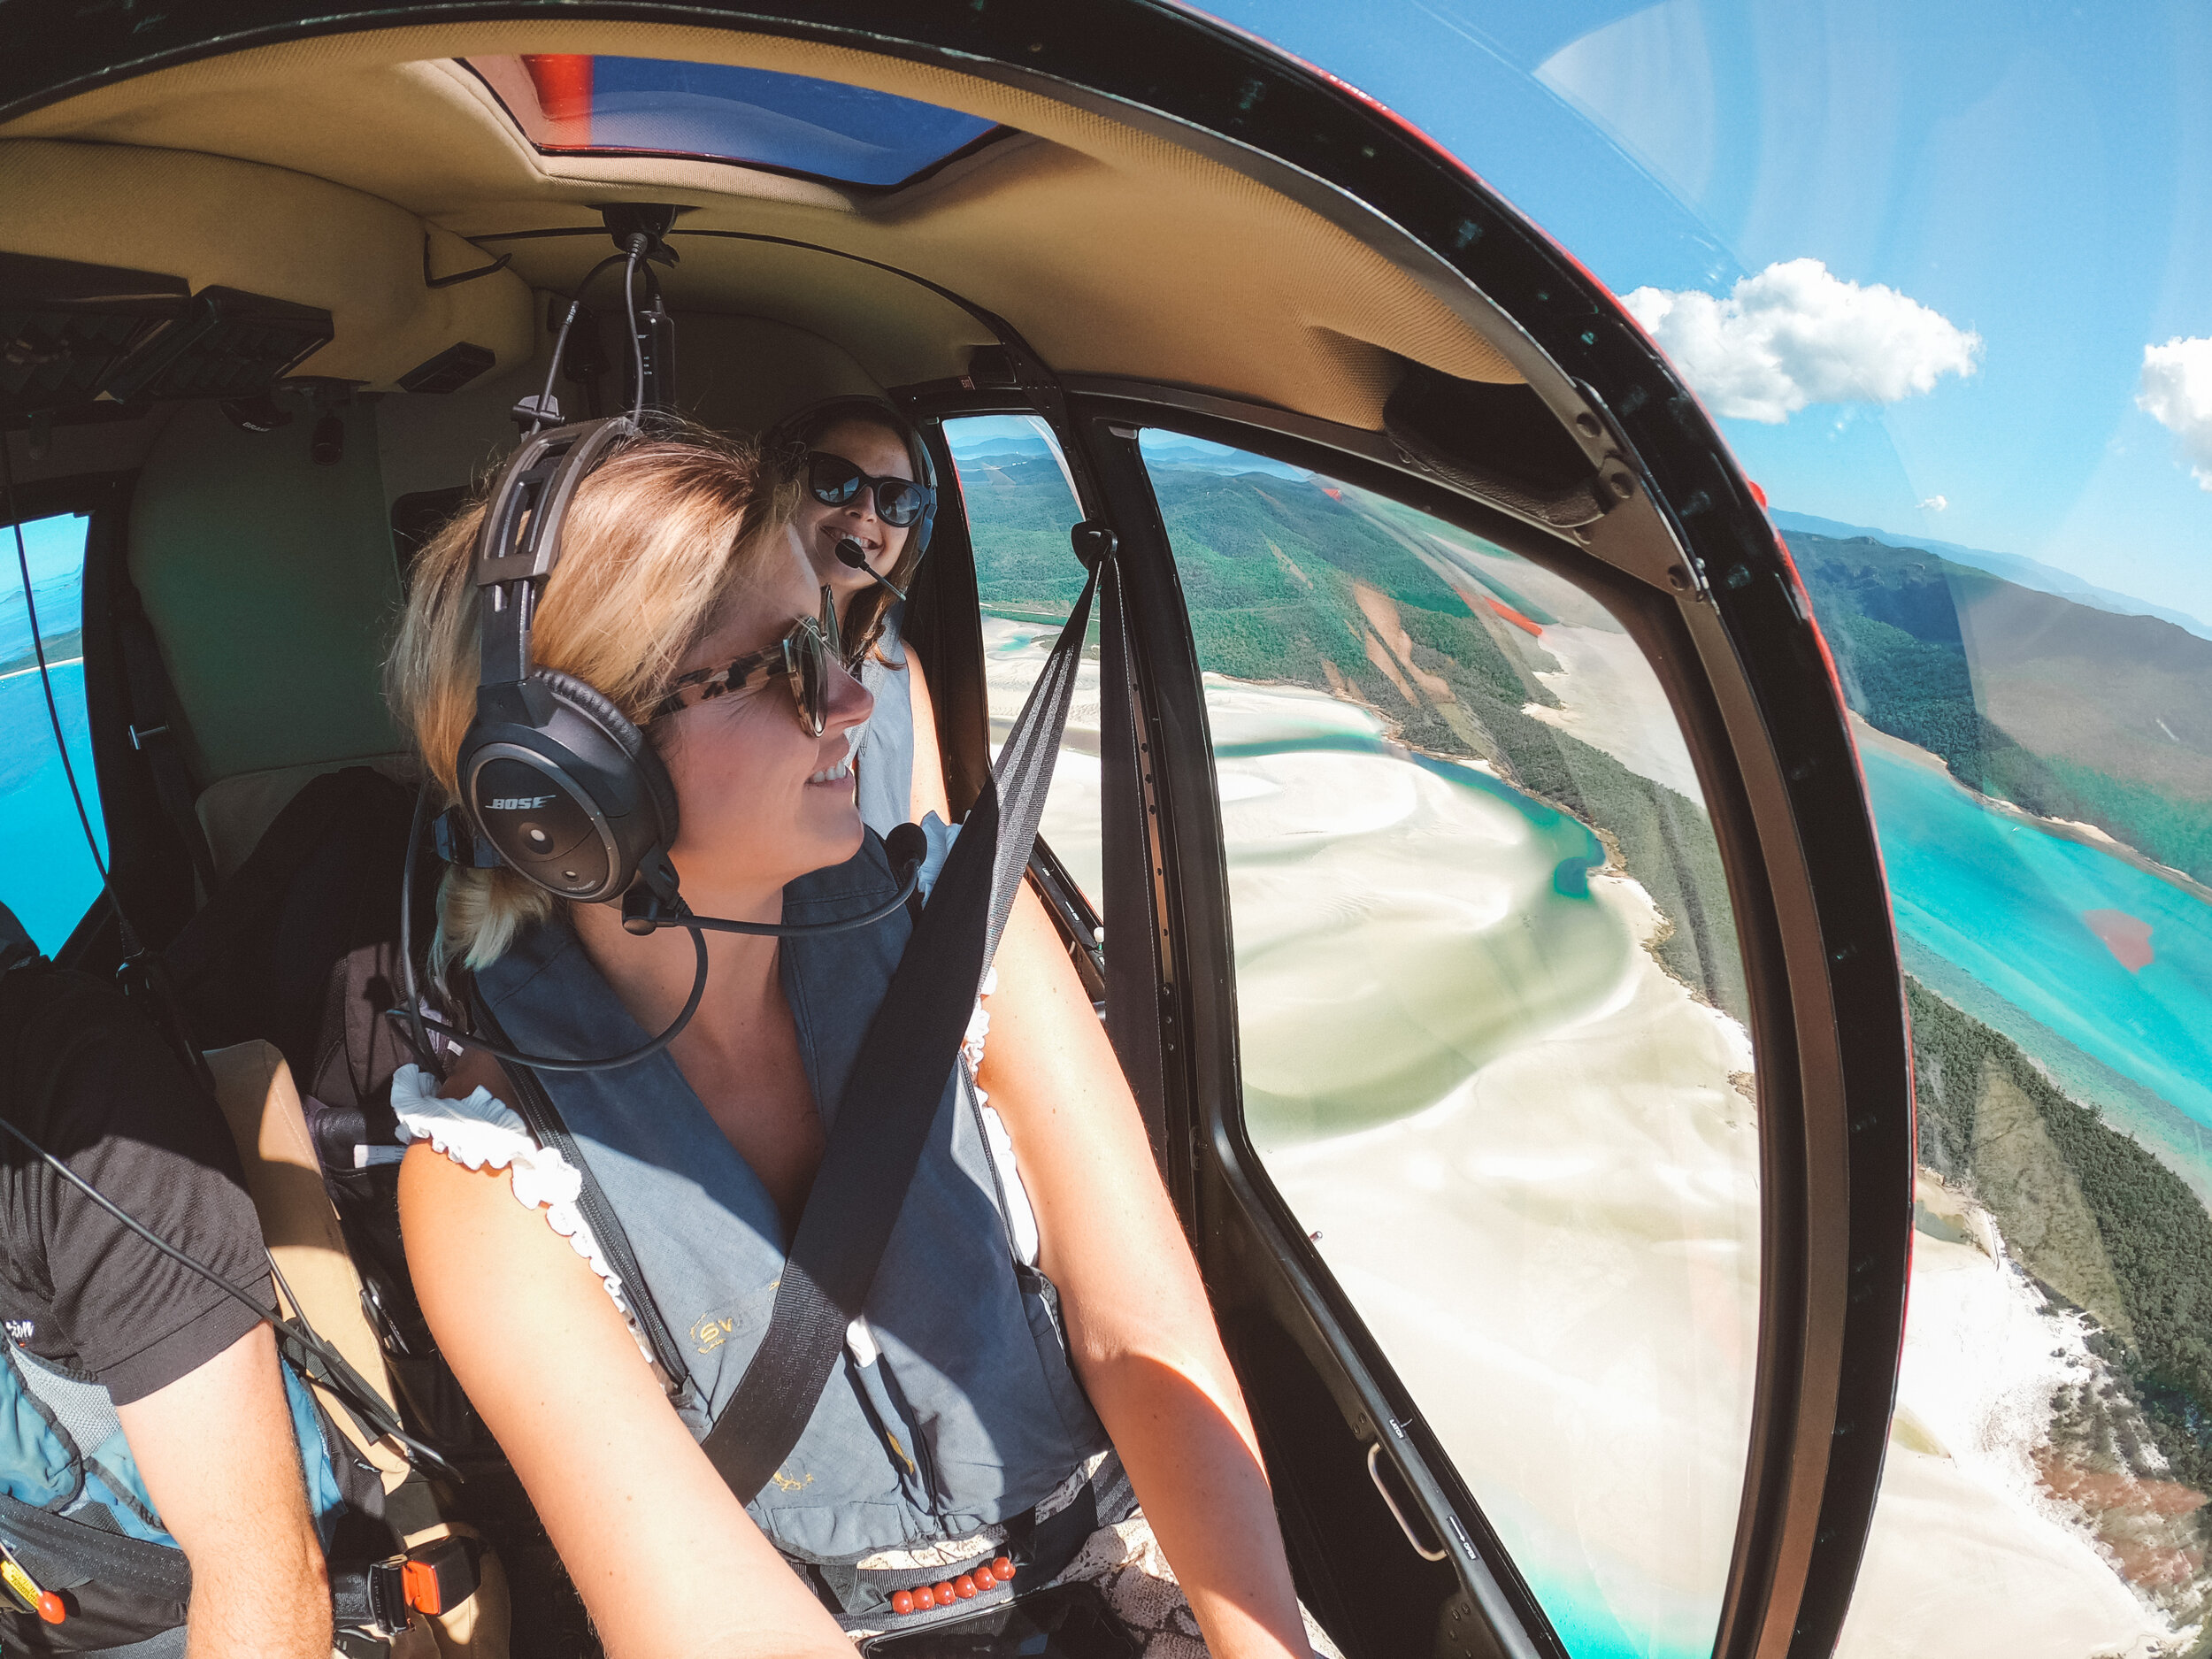 Selfie in the sky - Whitsundays - Helicopter Tour - Tropical North Queensland (QLD) - Australia